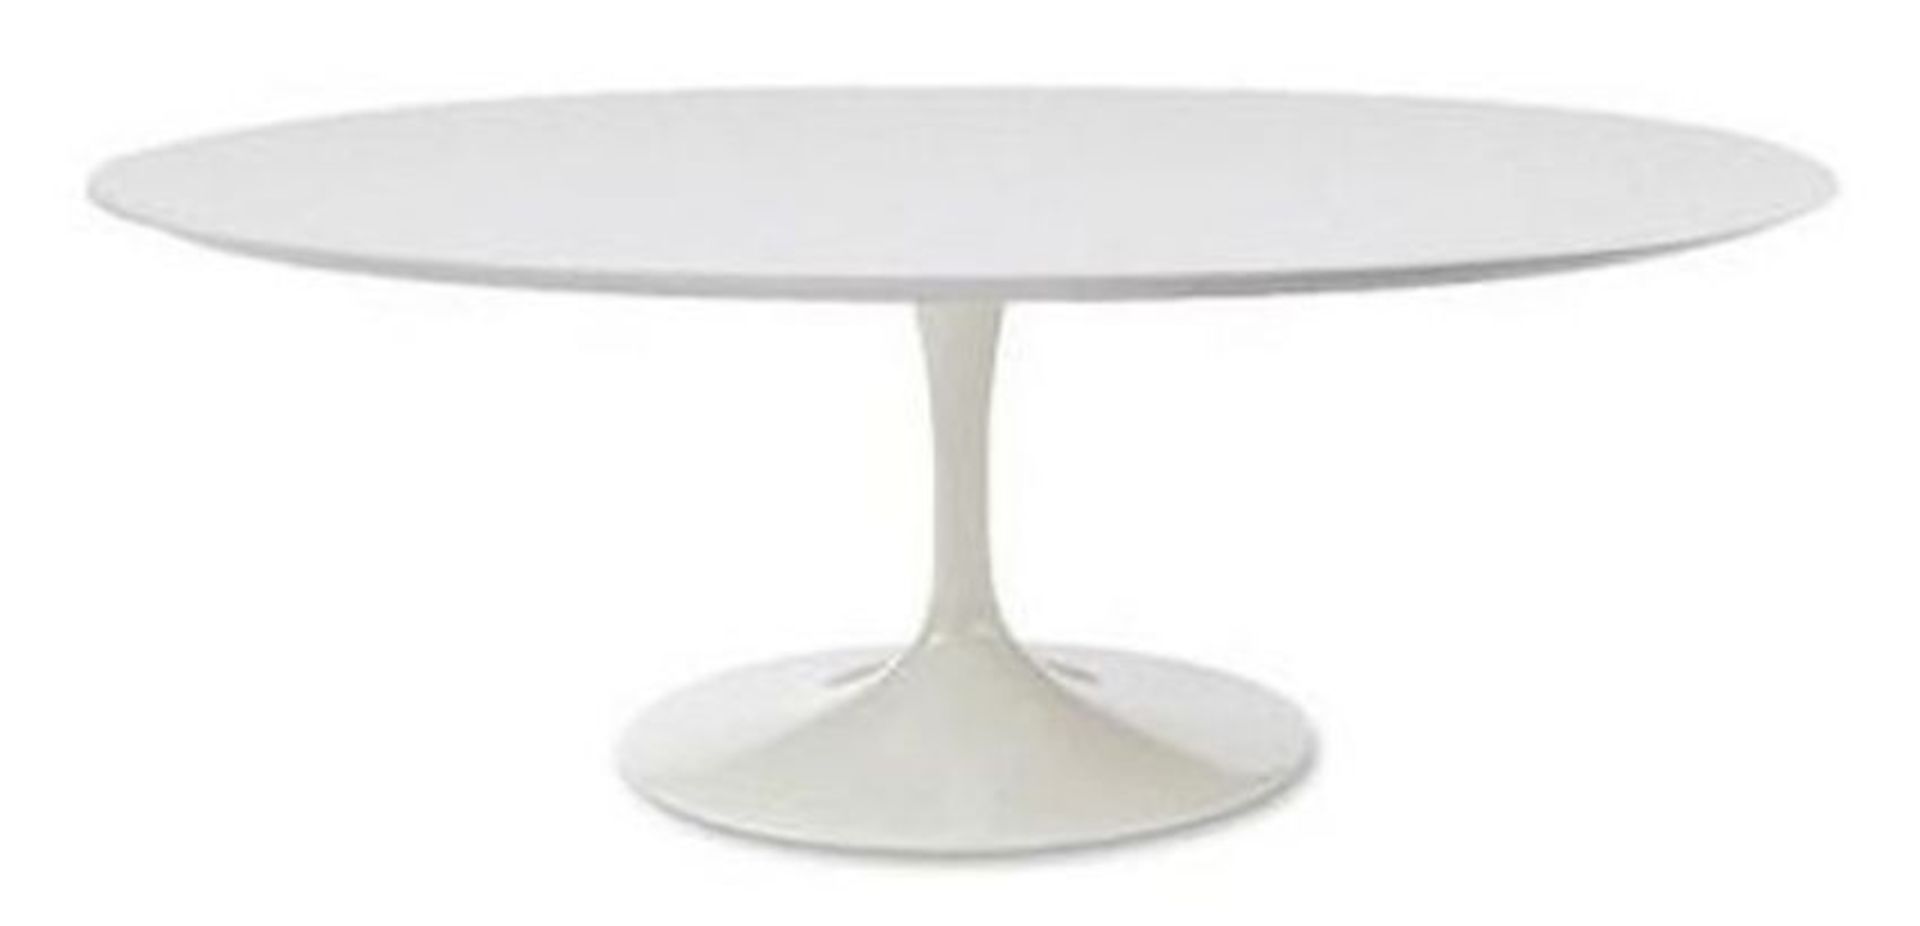 EERO SAARINEN STYLE INSPIRED LARGE OVAL DINING TABLE IN WHITE - RRP £549 - Image 2 of 3